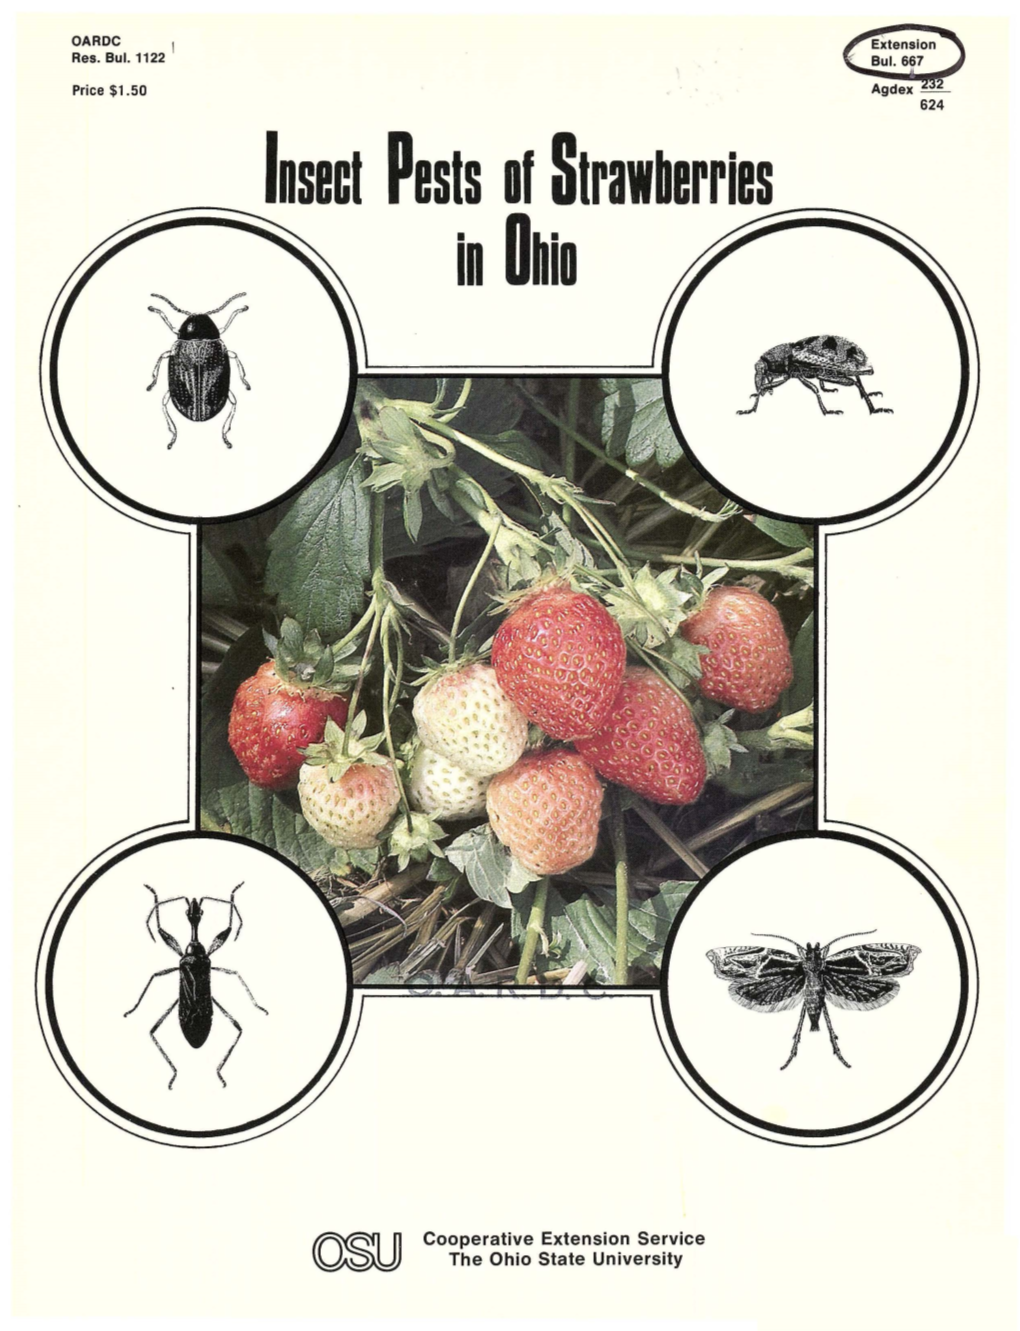 Insect Pests of Strawberries in Ohio